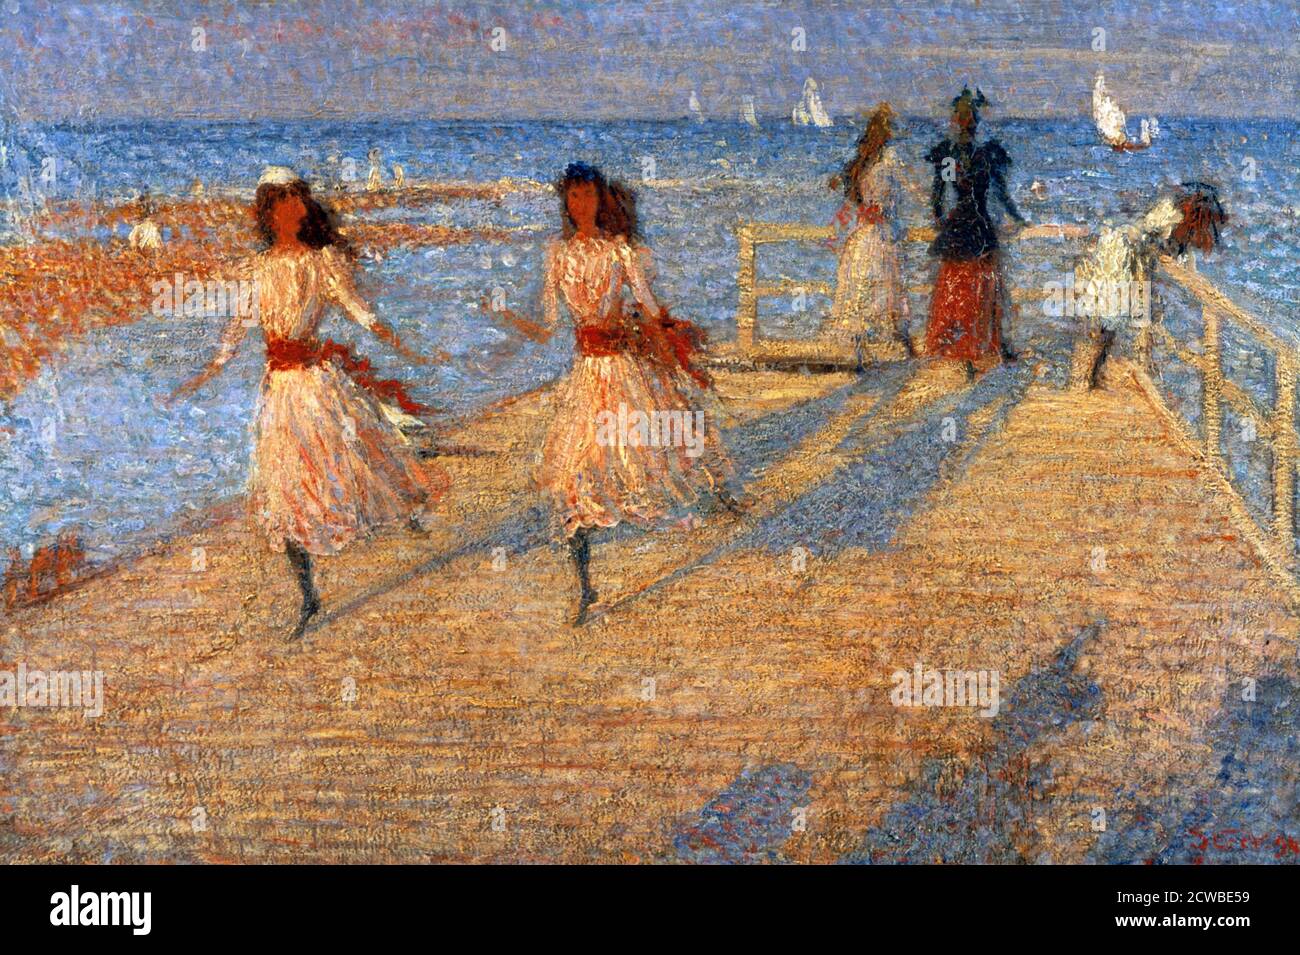 Girls Running, Walberswick Pier', 1888-1894 Artist: Philip Wilson Steer, Steer made many visits to Walberswick in Suffolk, where he had friends. He completed a number of paintings of the beach. Stock Photo